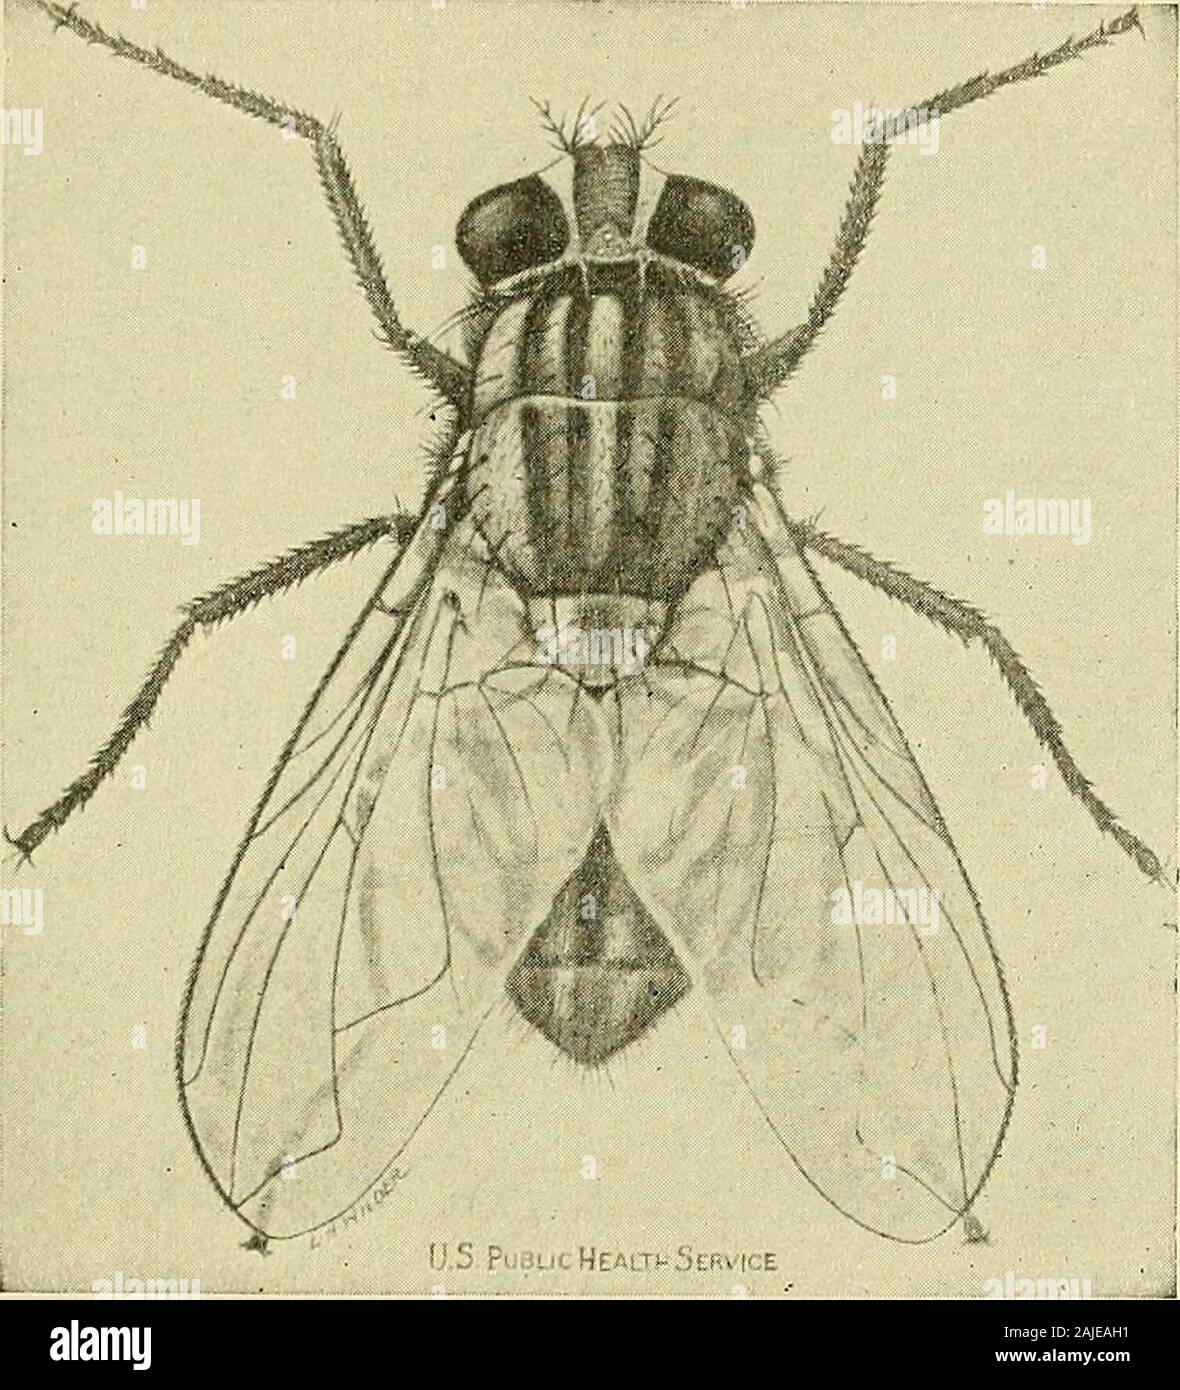 Practical preventive medicine . transmission of plague, and flies,principally the house fly, in the transmission of the others. Inthe case of the former, the plague bacillus leaves the fleasbody both by the probocis and the feces; in the case of the lattergroup, the flies probocis, its excreta, regurgitated material andthe exterior of its body surface may afford means of convey-ance. In the former instance the infective agents are directlyreintroduced by the insect into a new host, in the latter trans- INSECTS AS VECTORS OF INFECTIVE AGENTS l83 mission is effected through the contamination of Stock Photo